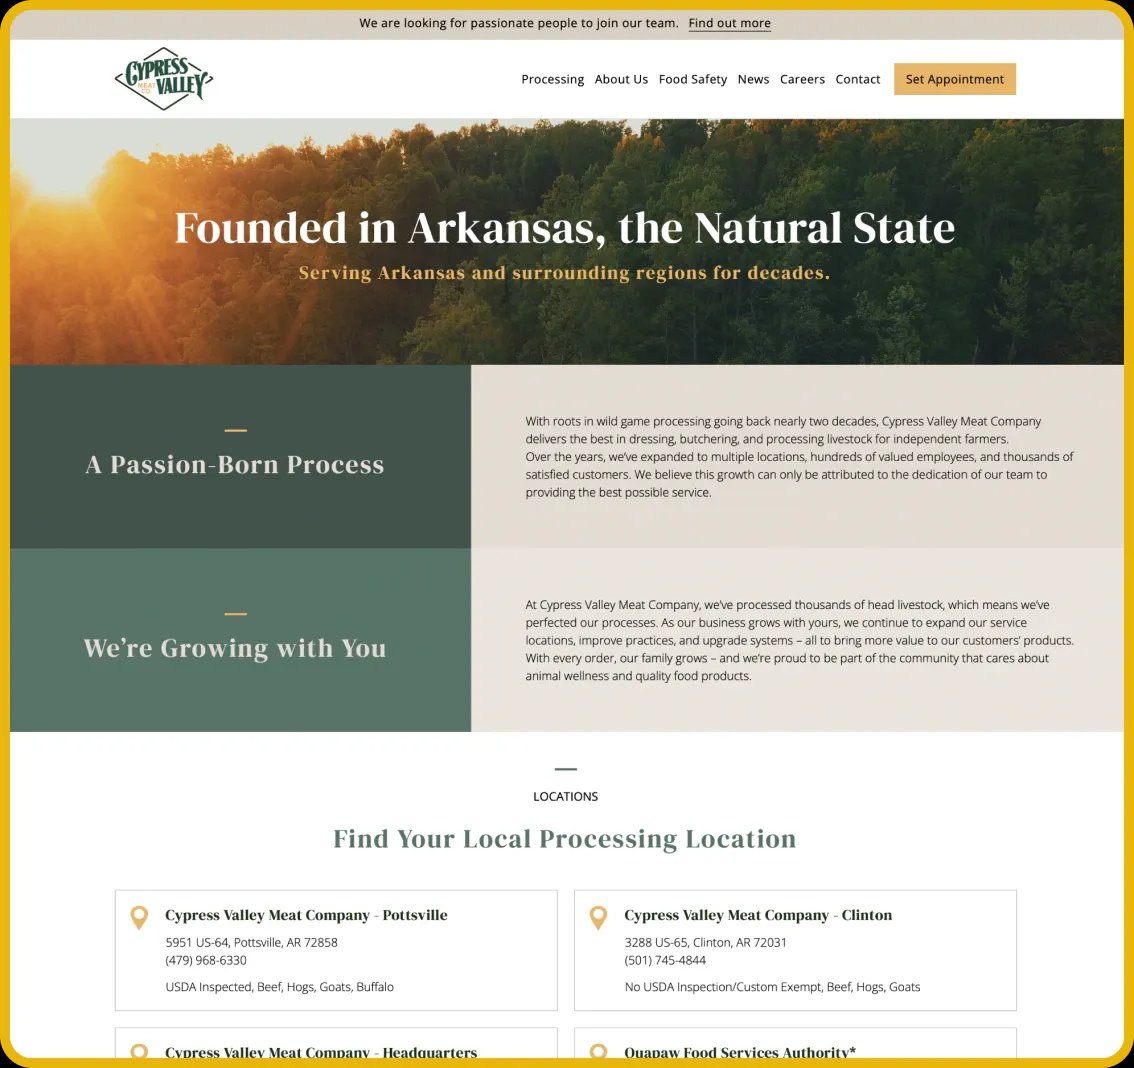 Image of Cypress Valley webpage.